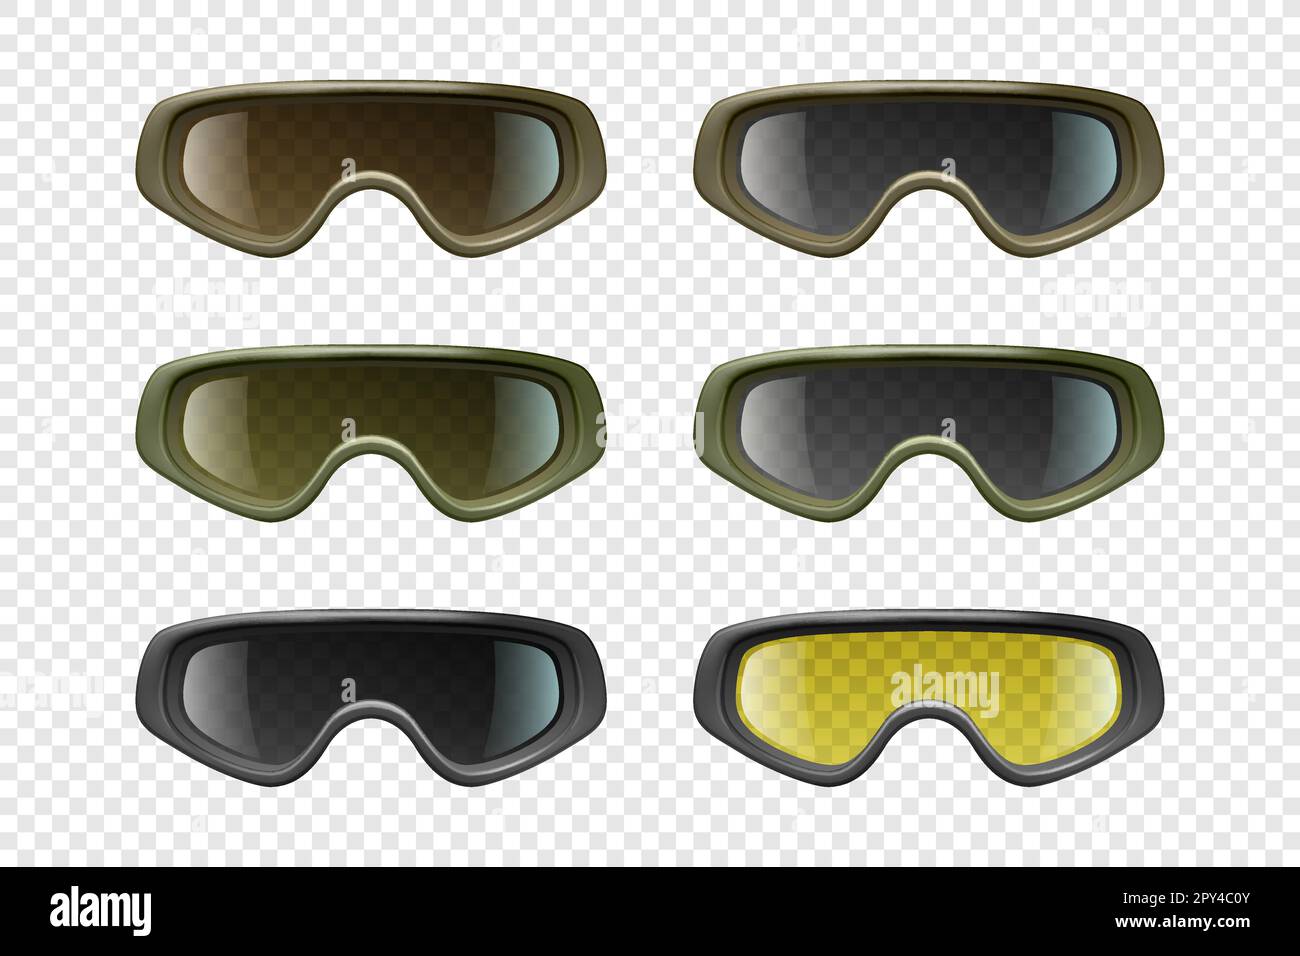 Vector 3d Realistic Military, Industrial Safety Glasses Icon Set Closeup Isolated. Transparent Glasses, Safety Glasses - Sports, Military, Uniform Stock Vector